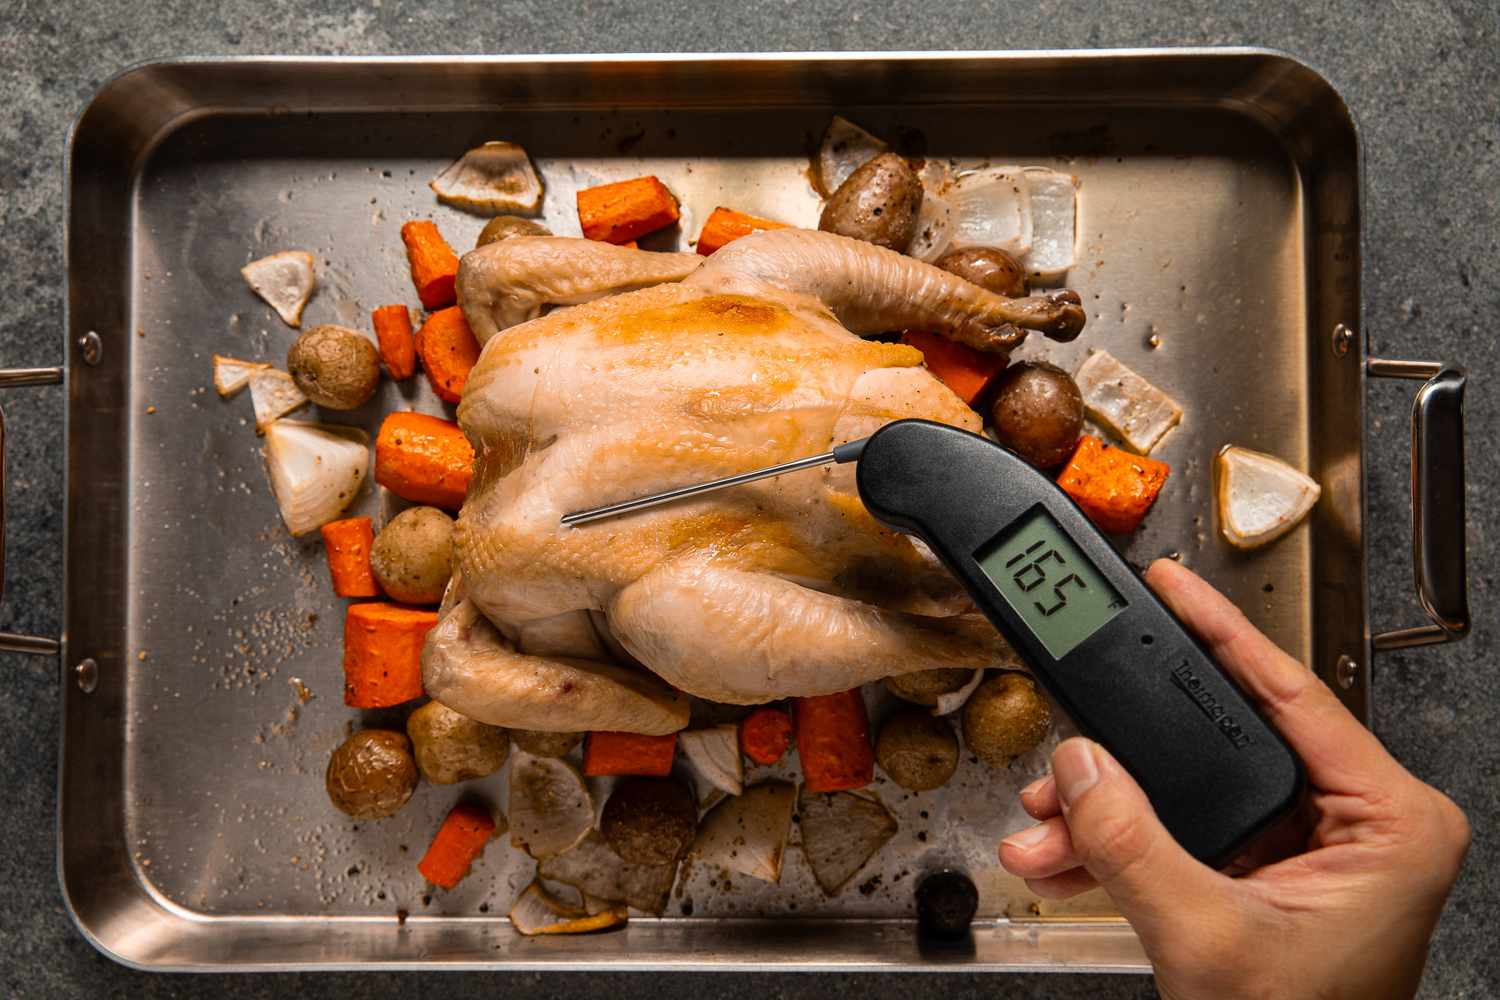 Electric thermometer checking internal temperature of the roasted chicken. Thermometer reads 165F.